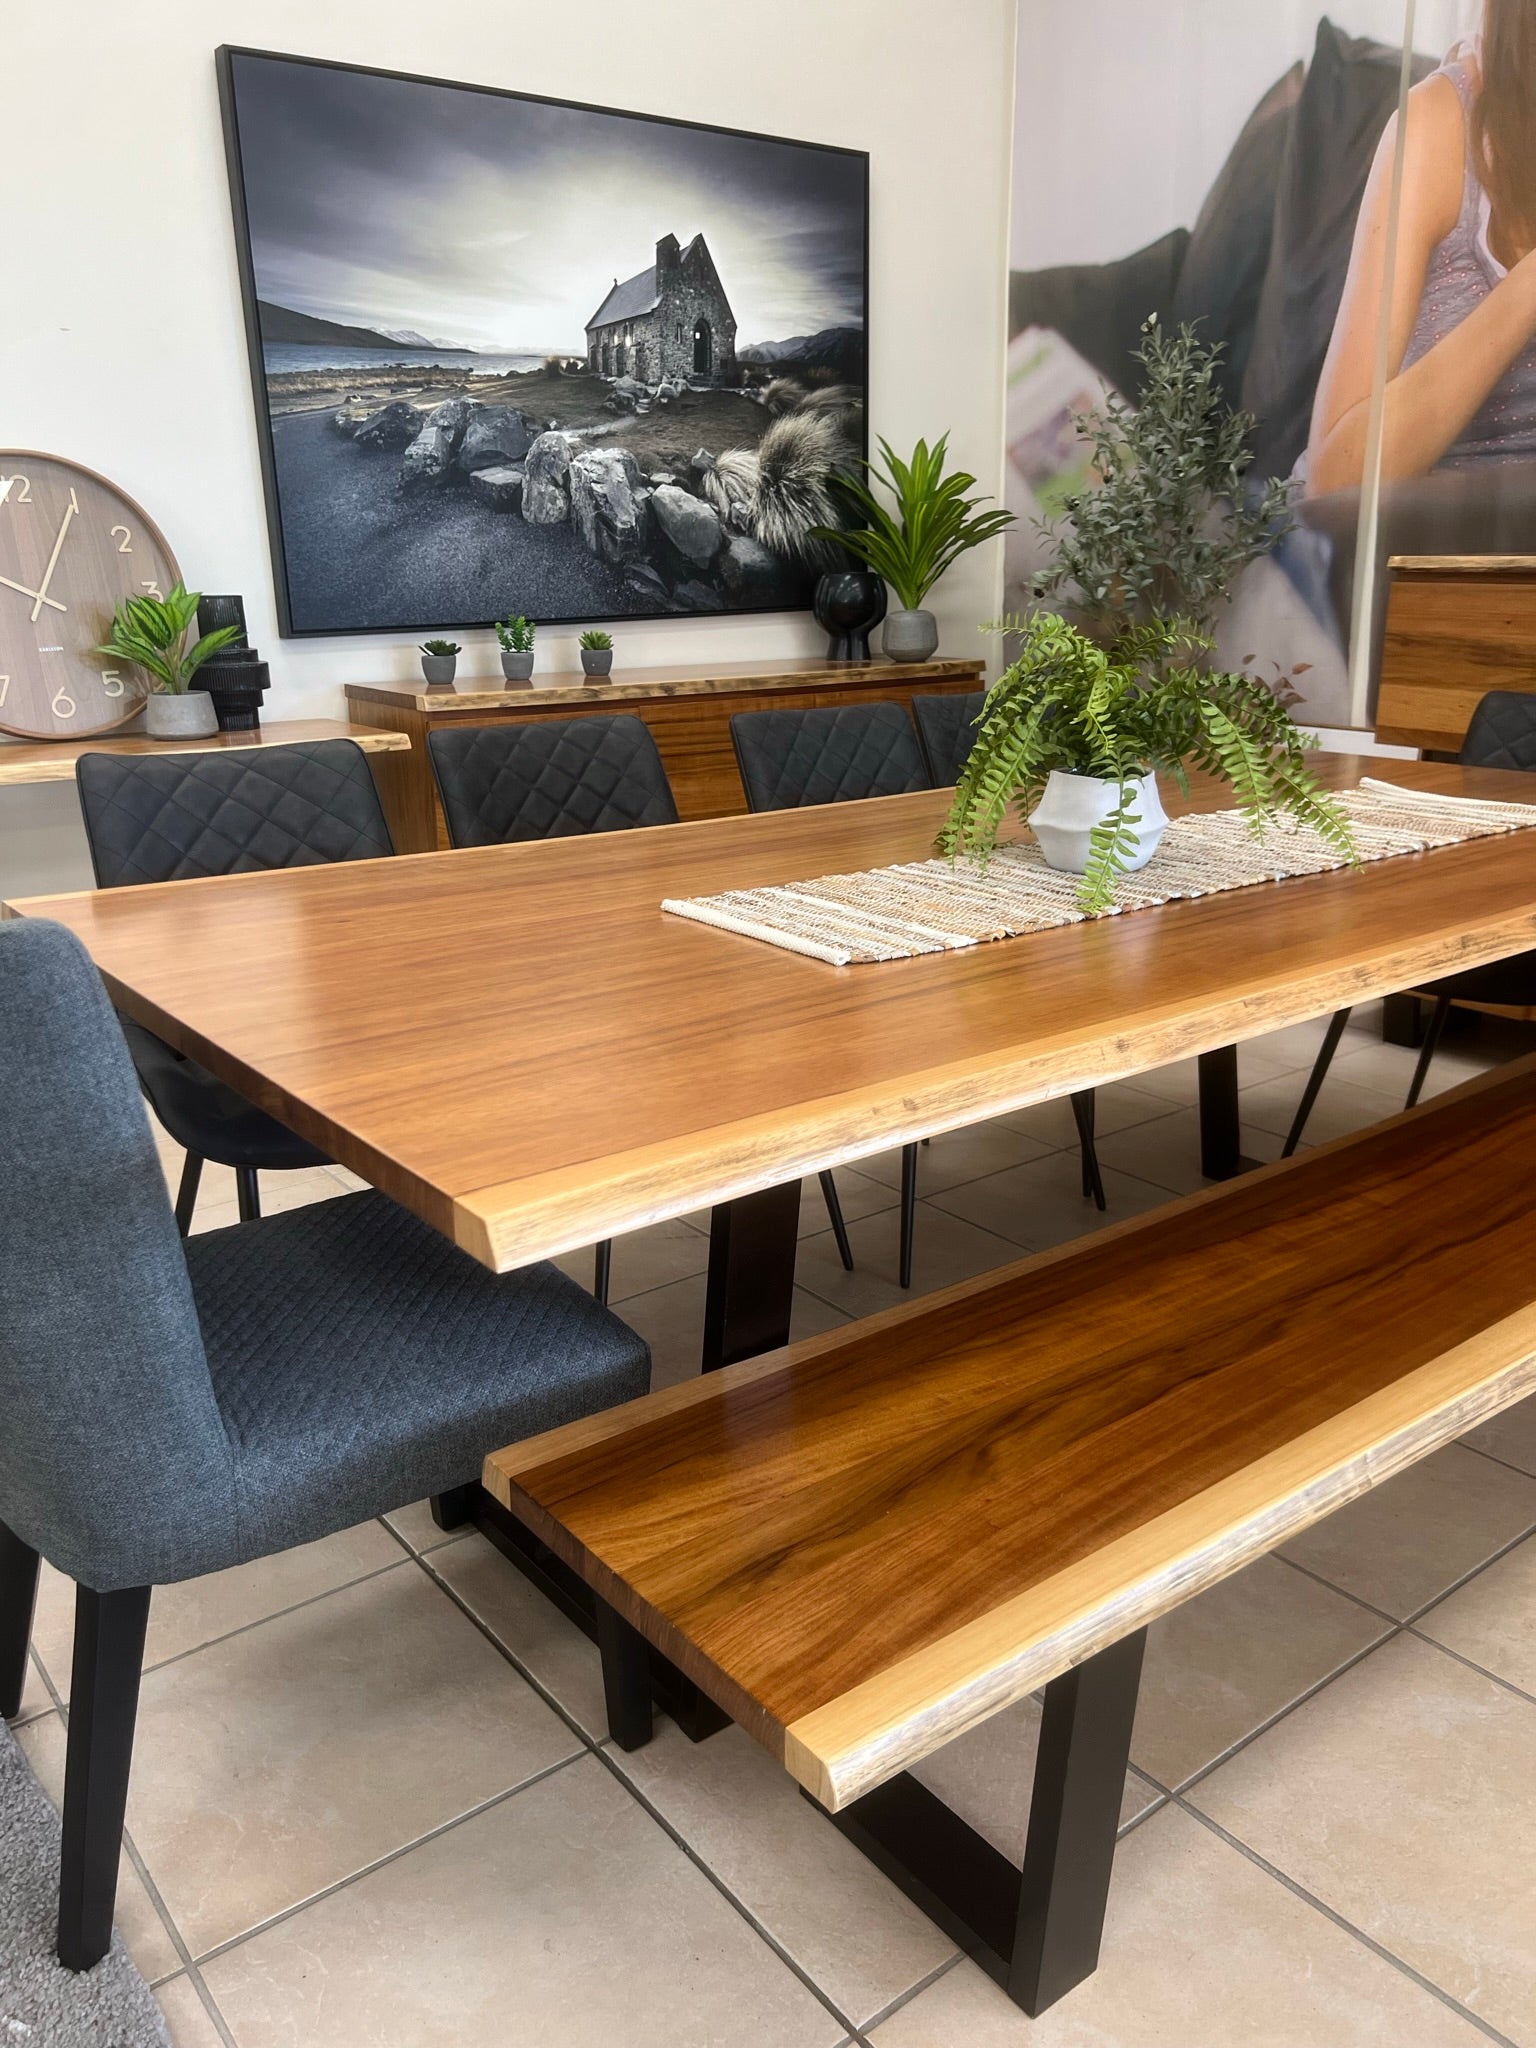 "Dining in Style: How to Select the Perfect Dining Table Set"